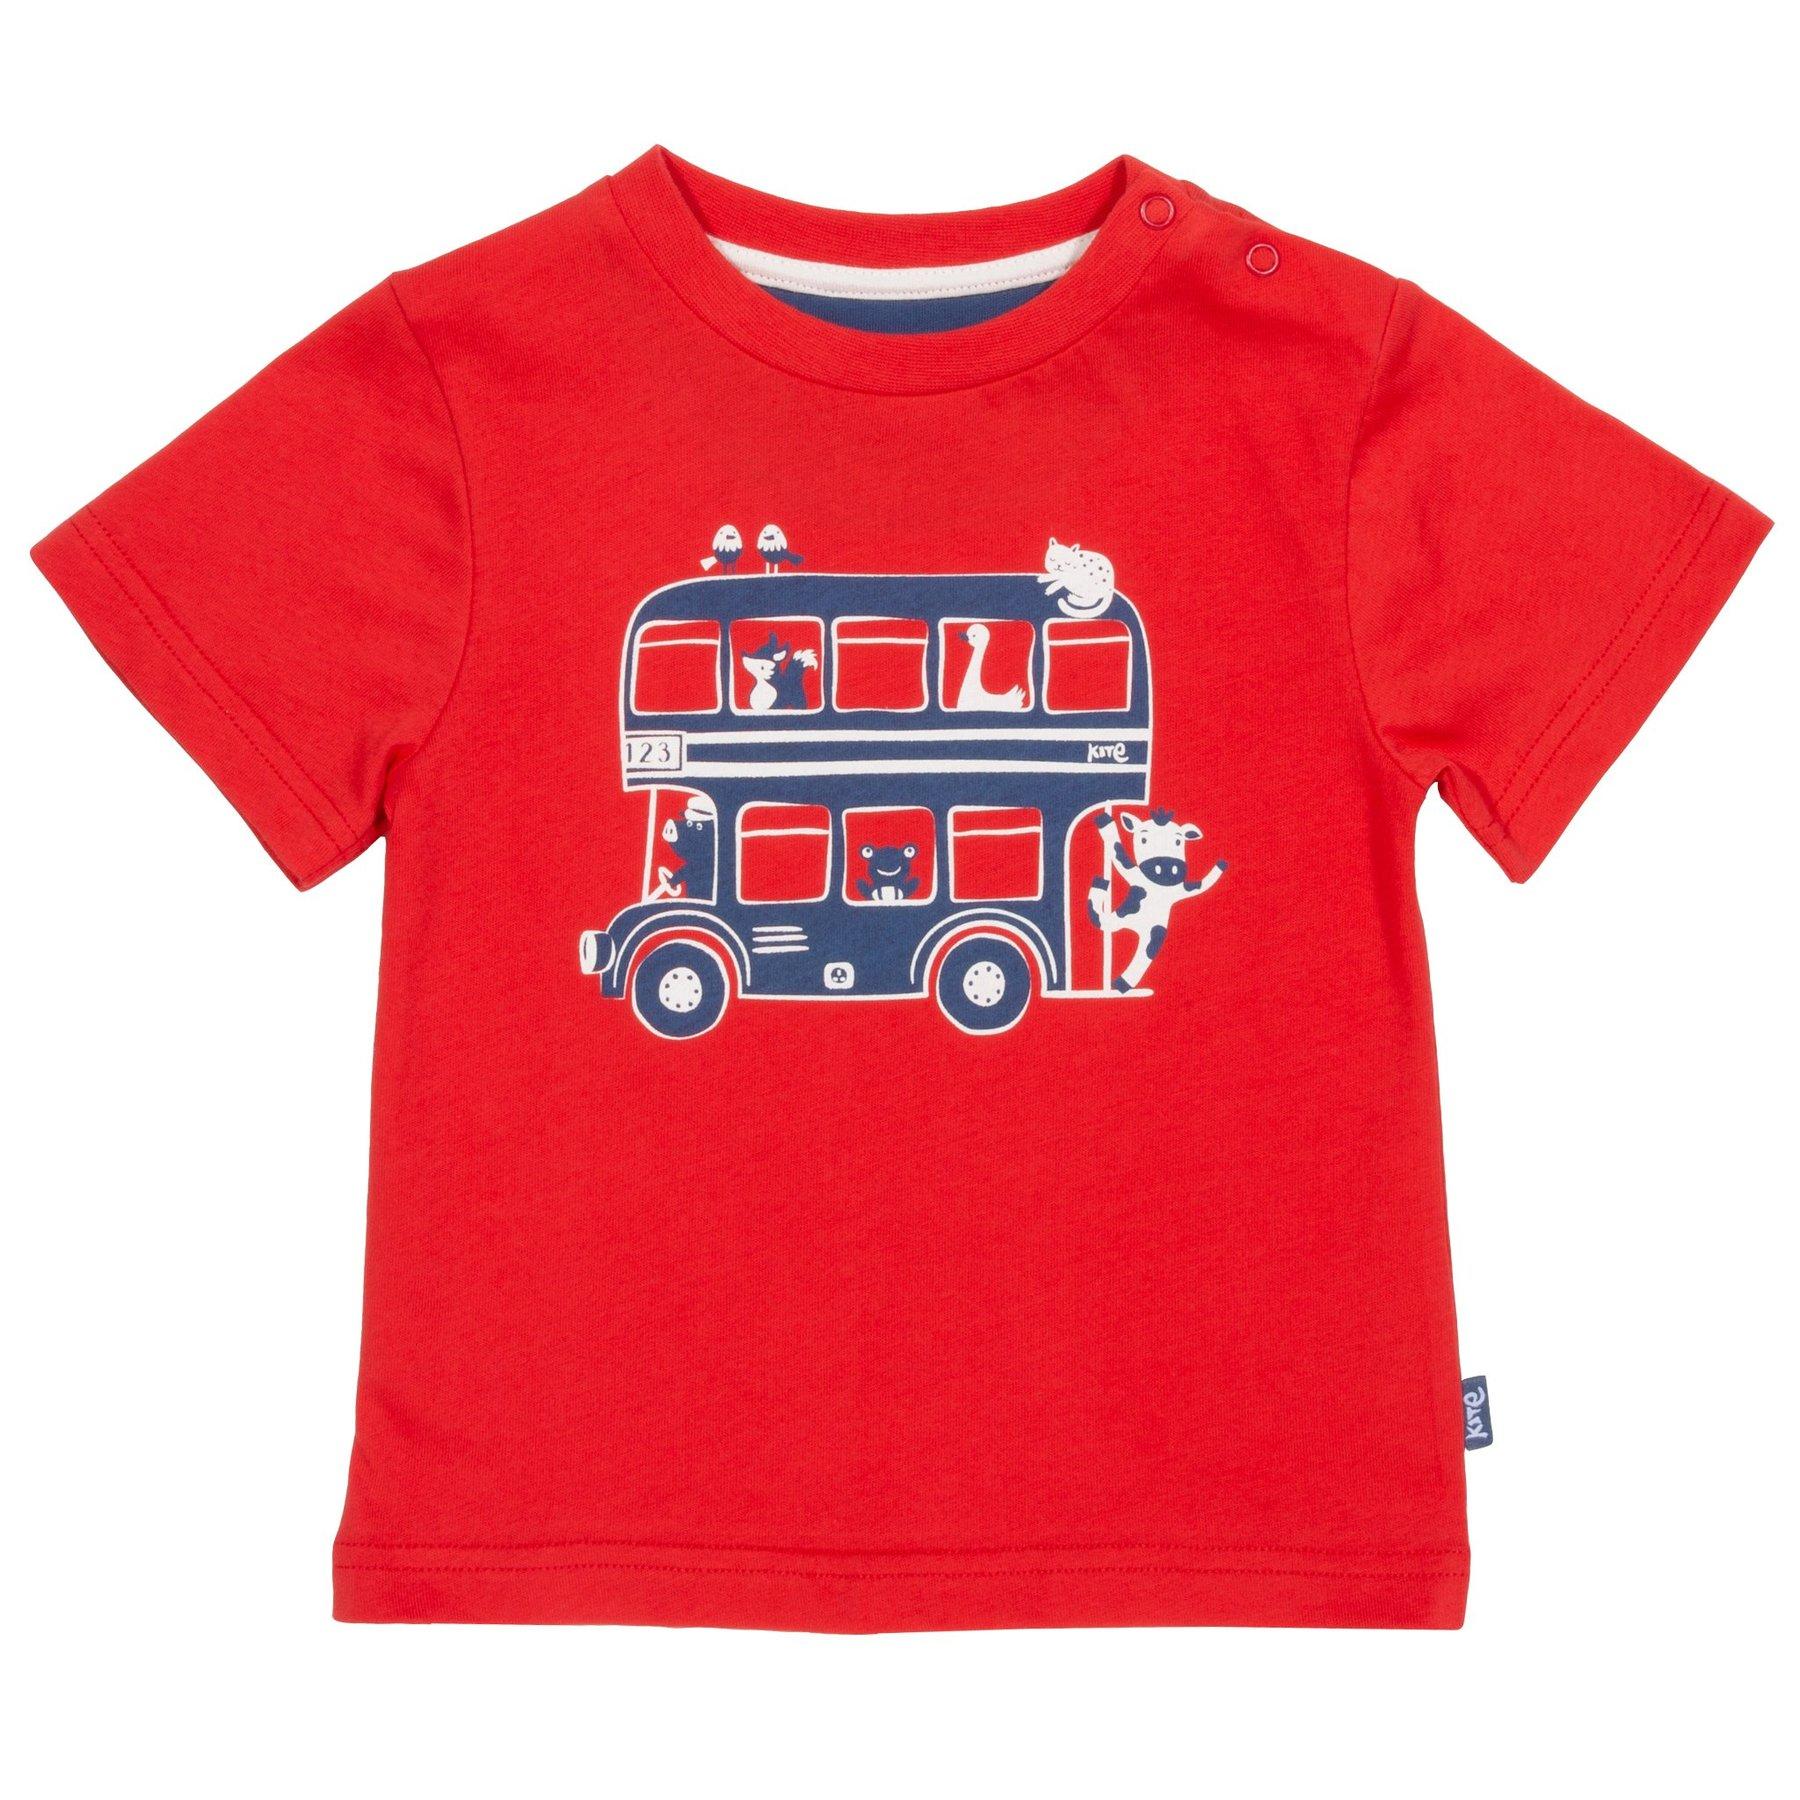 Kite Clothing On the Bus T-Shirt front